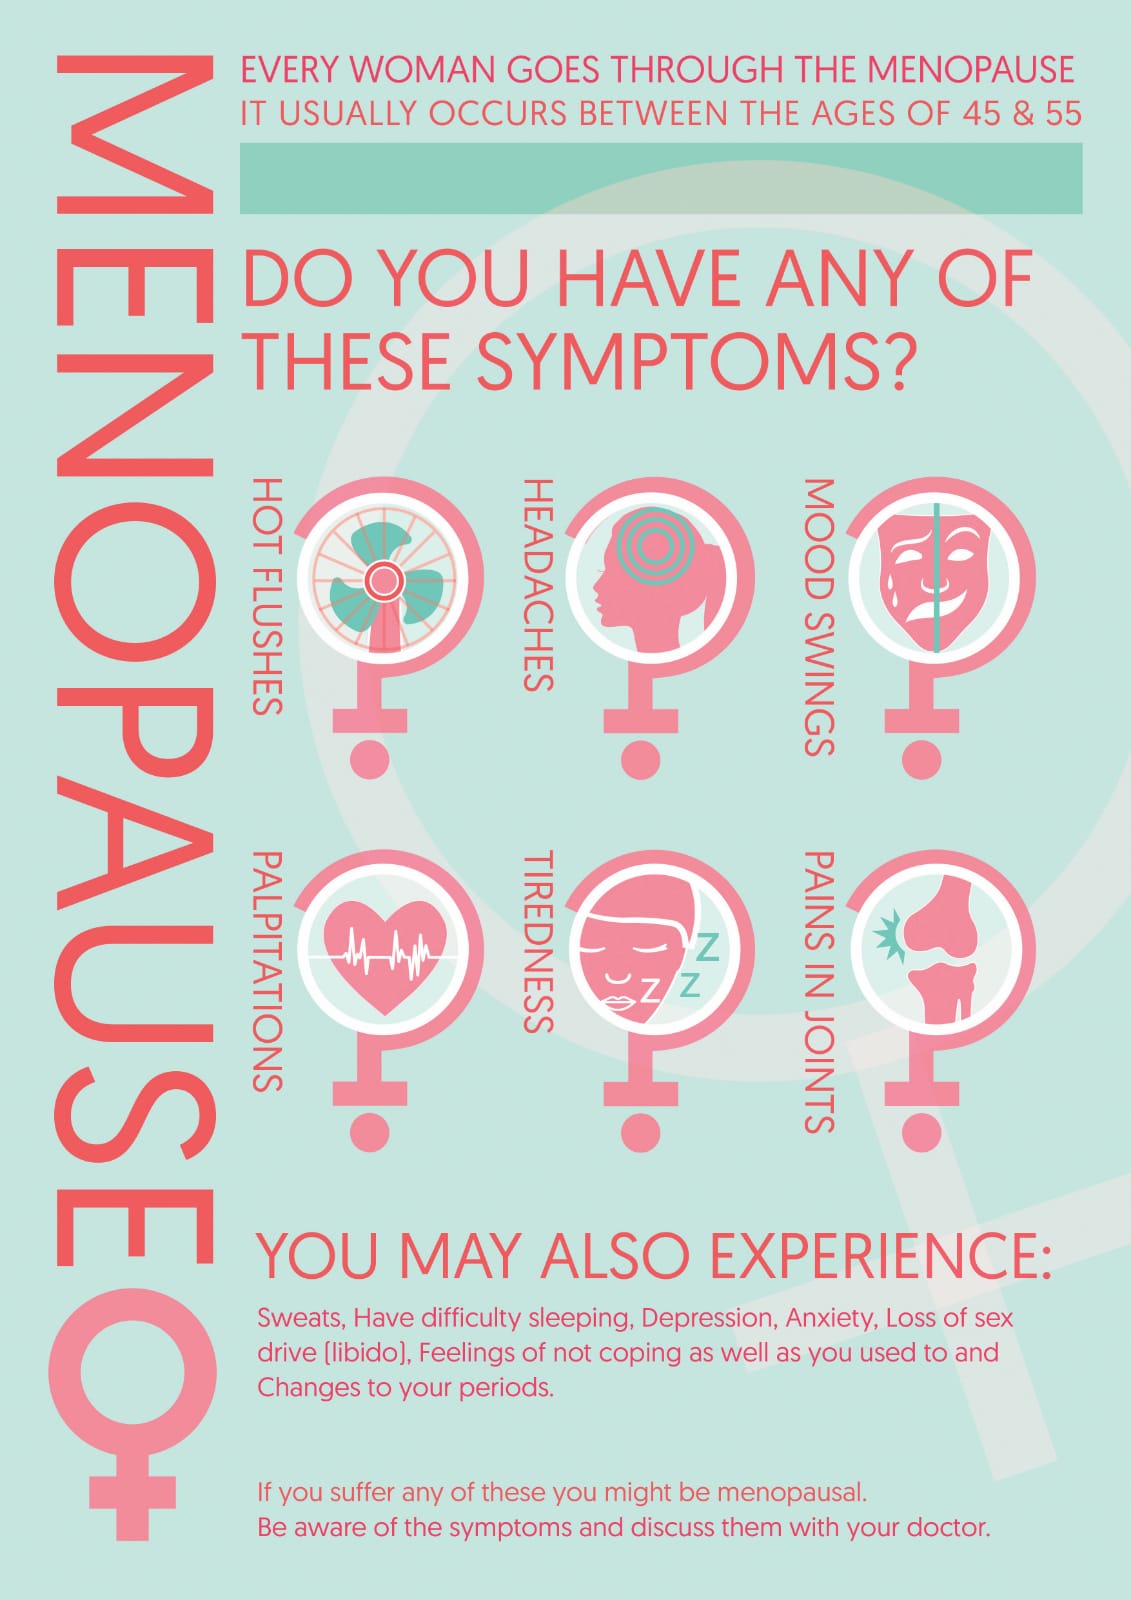 #KnowYourMenopause Poster Campaign